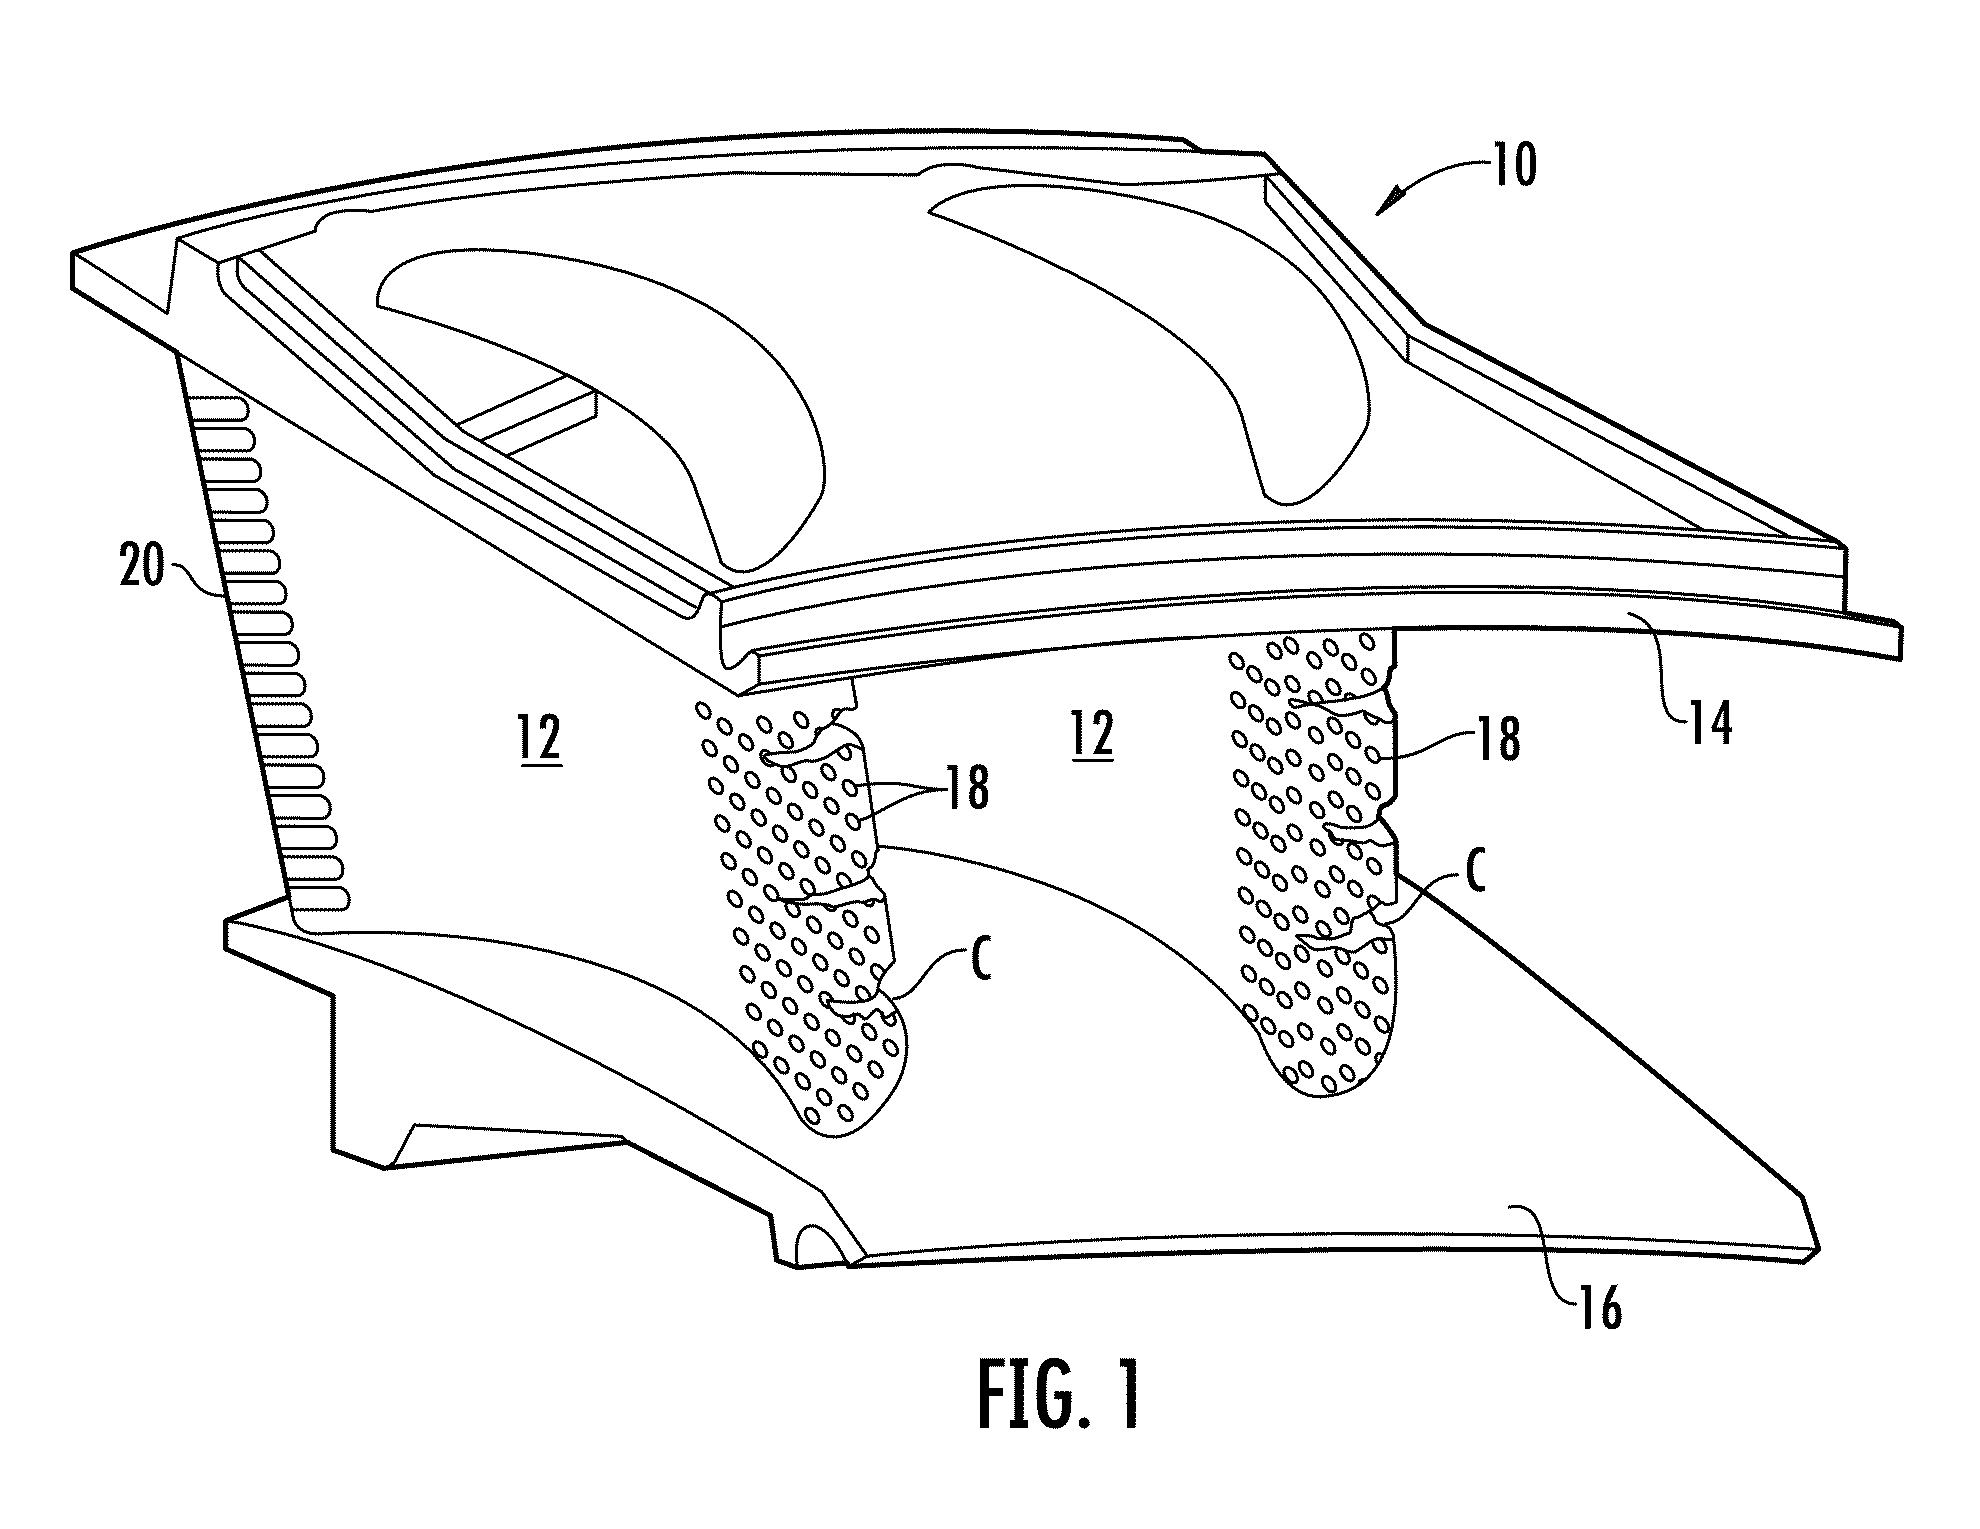 Repair method for tbc coated turbine components